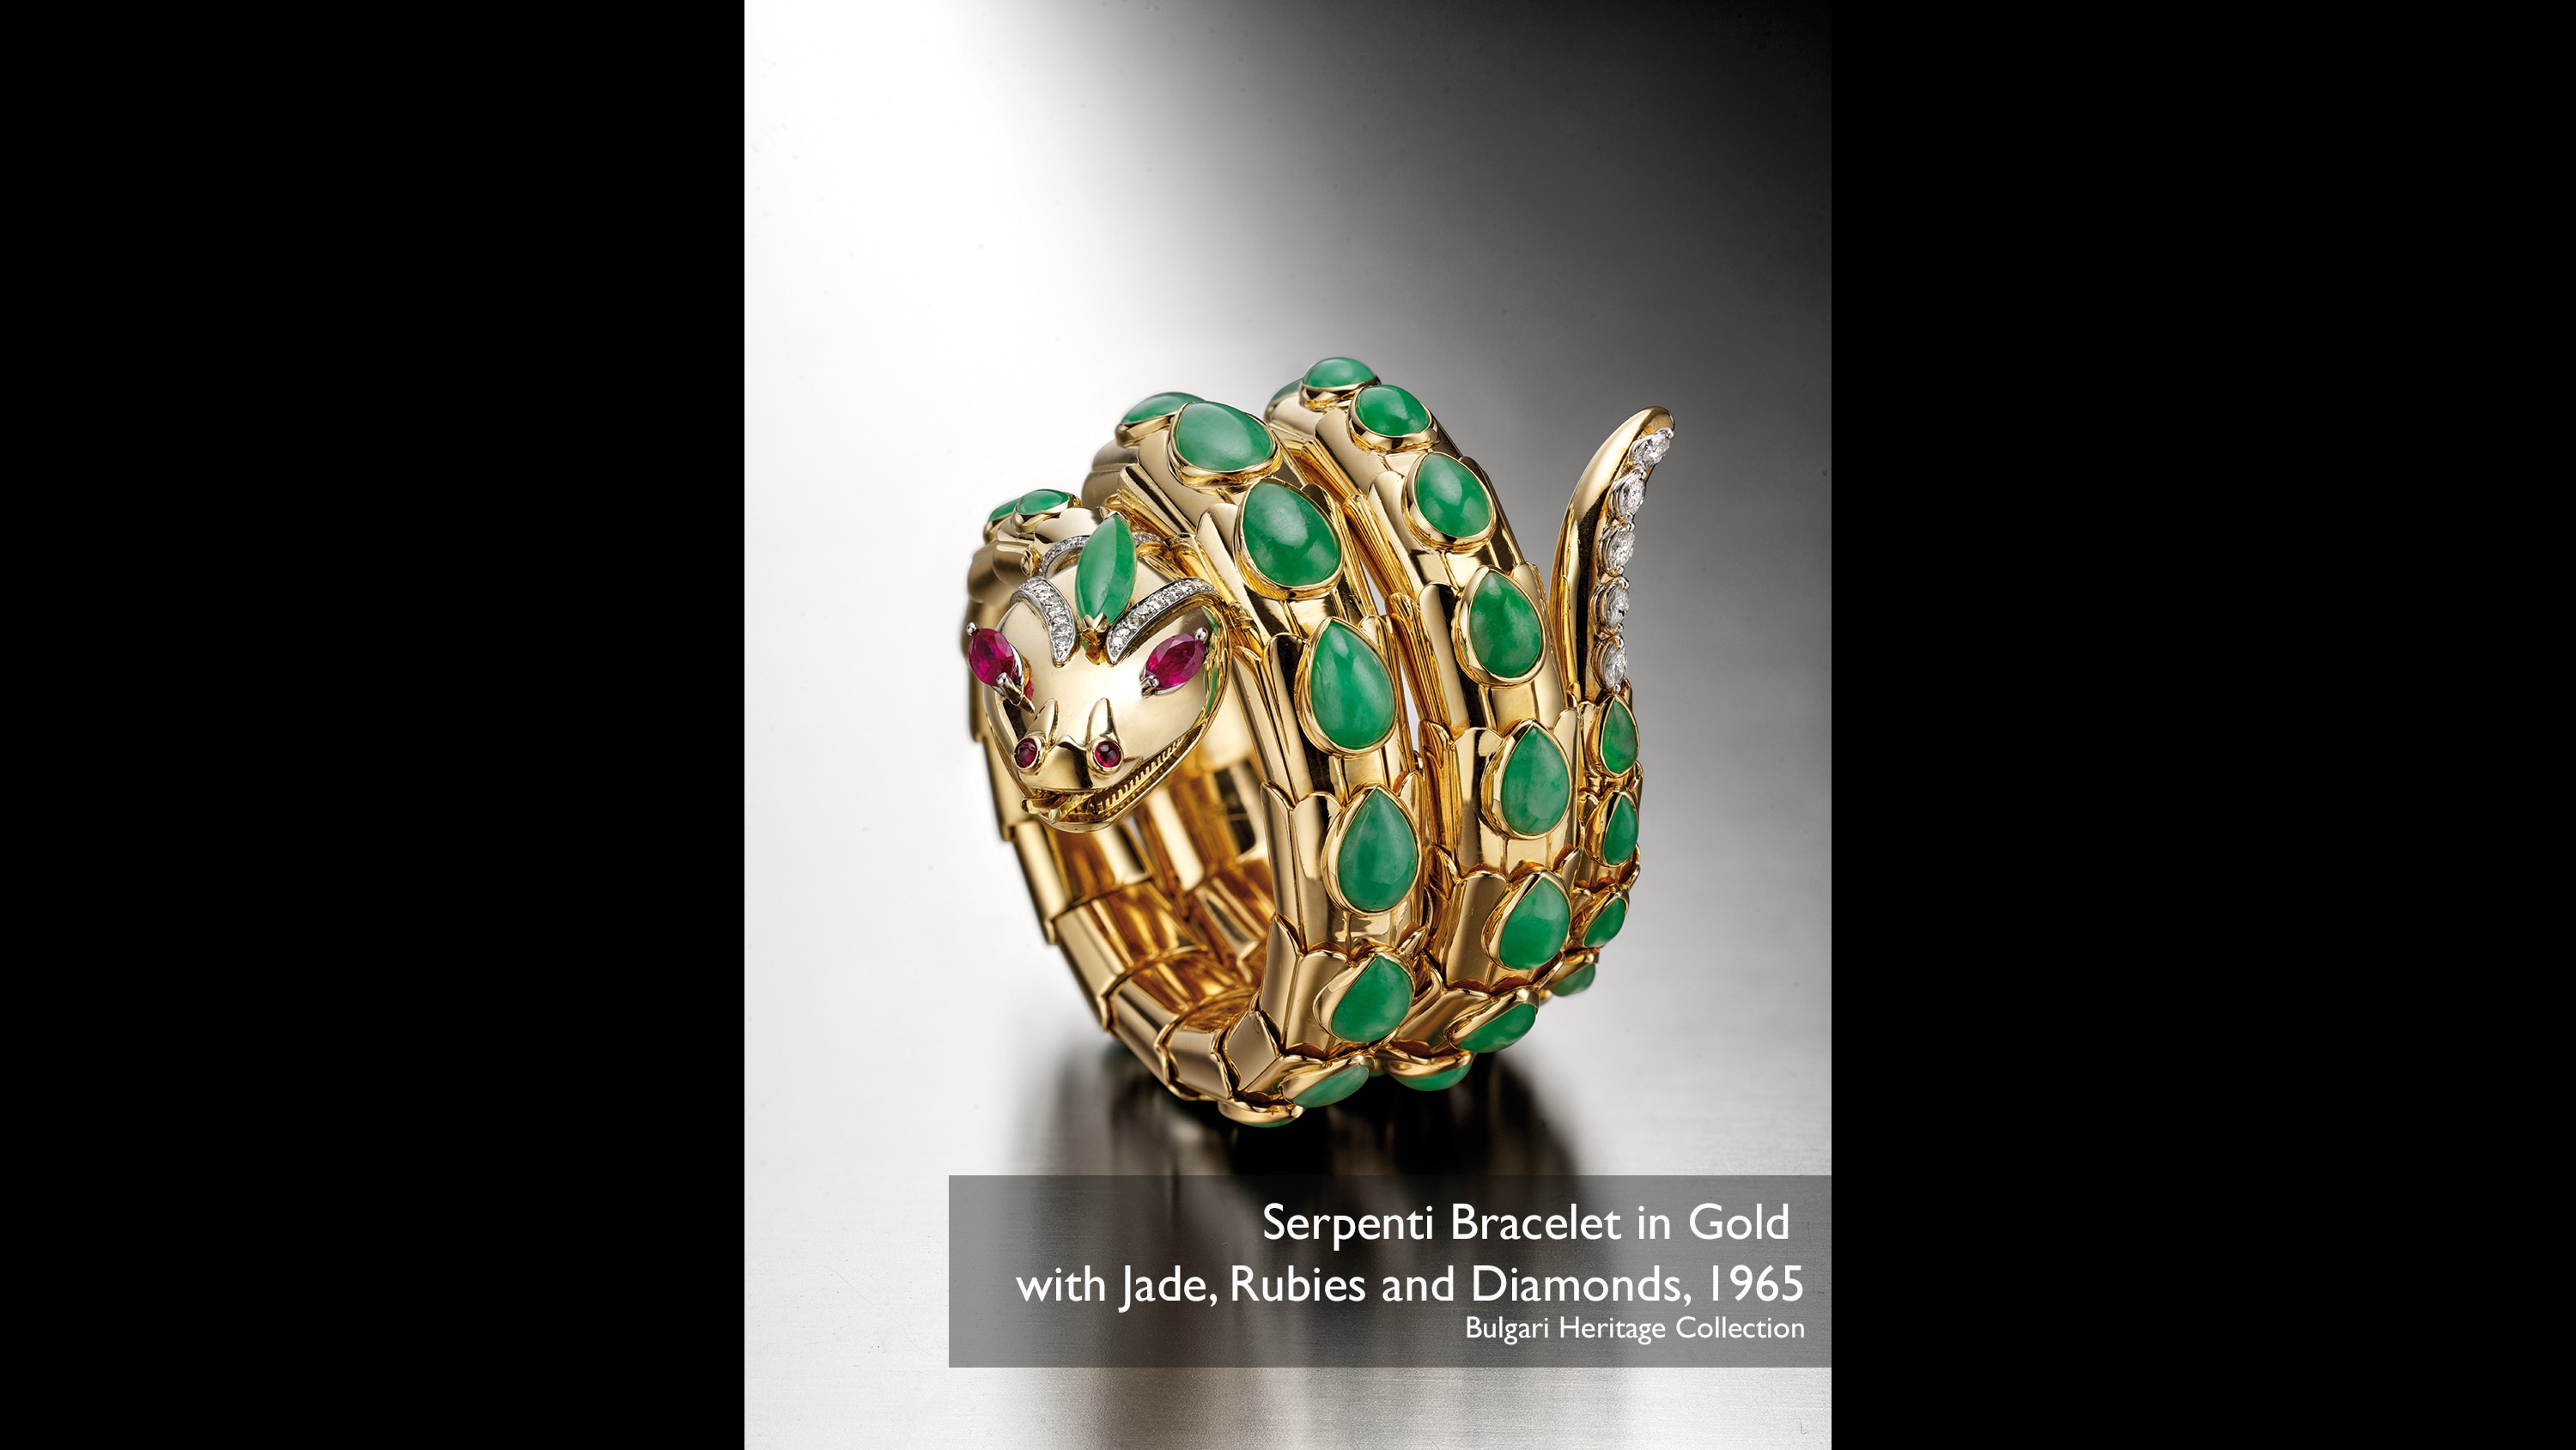 Serpenti bracelet in gold with jade, rubies and diamonds, 1965 Bulgari Heritage Collection